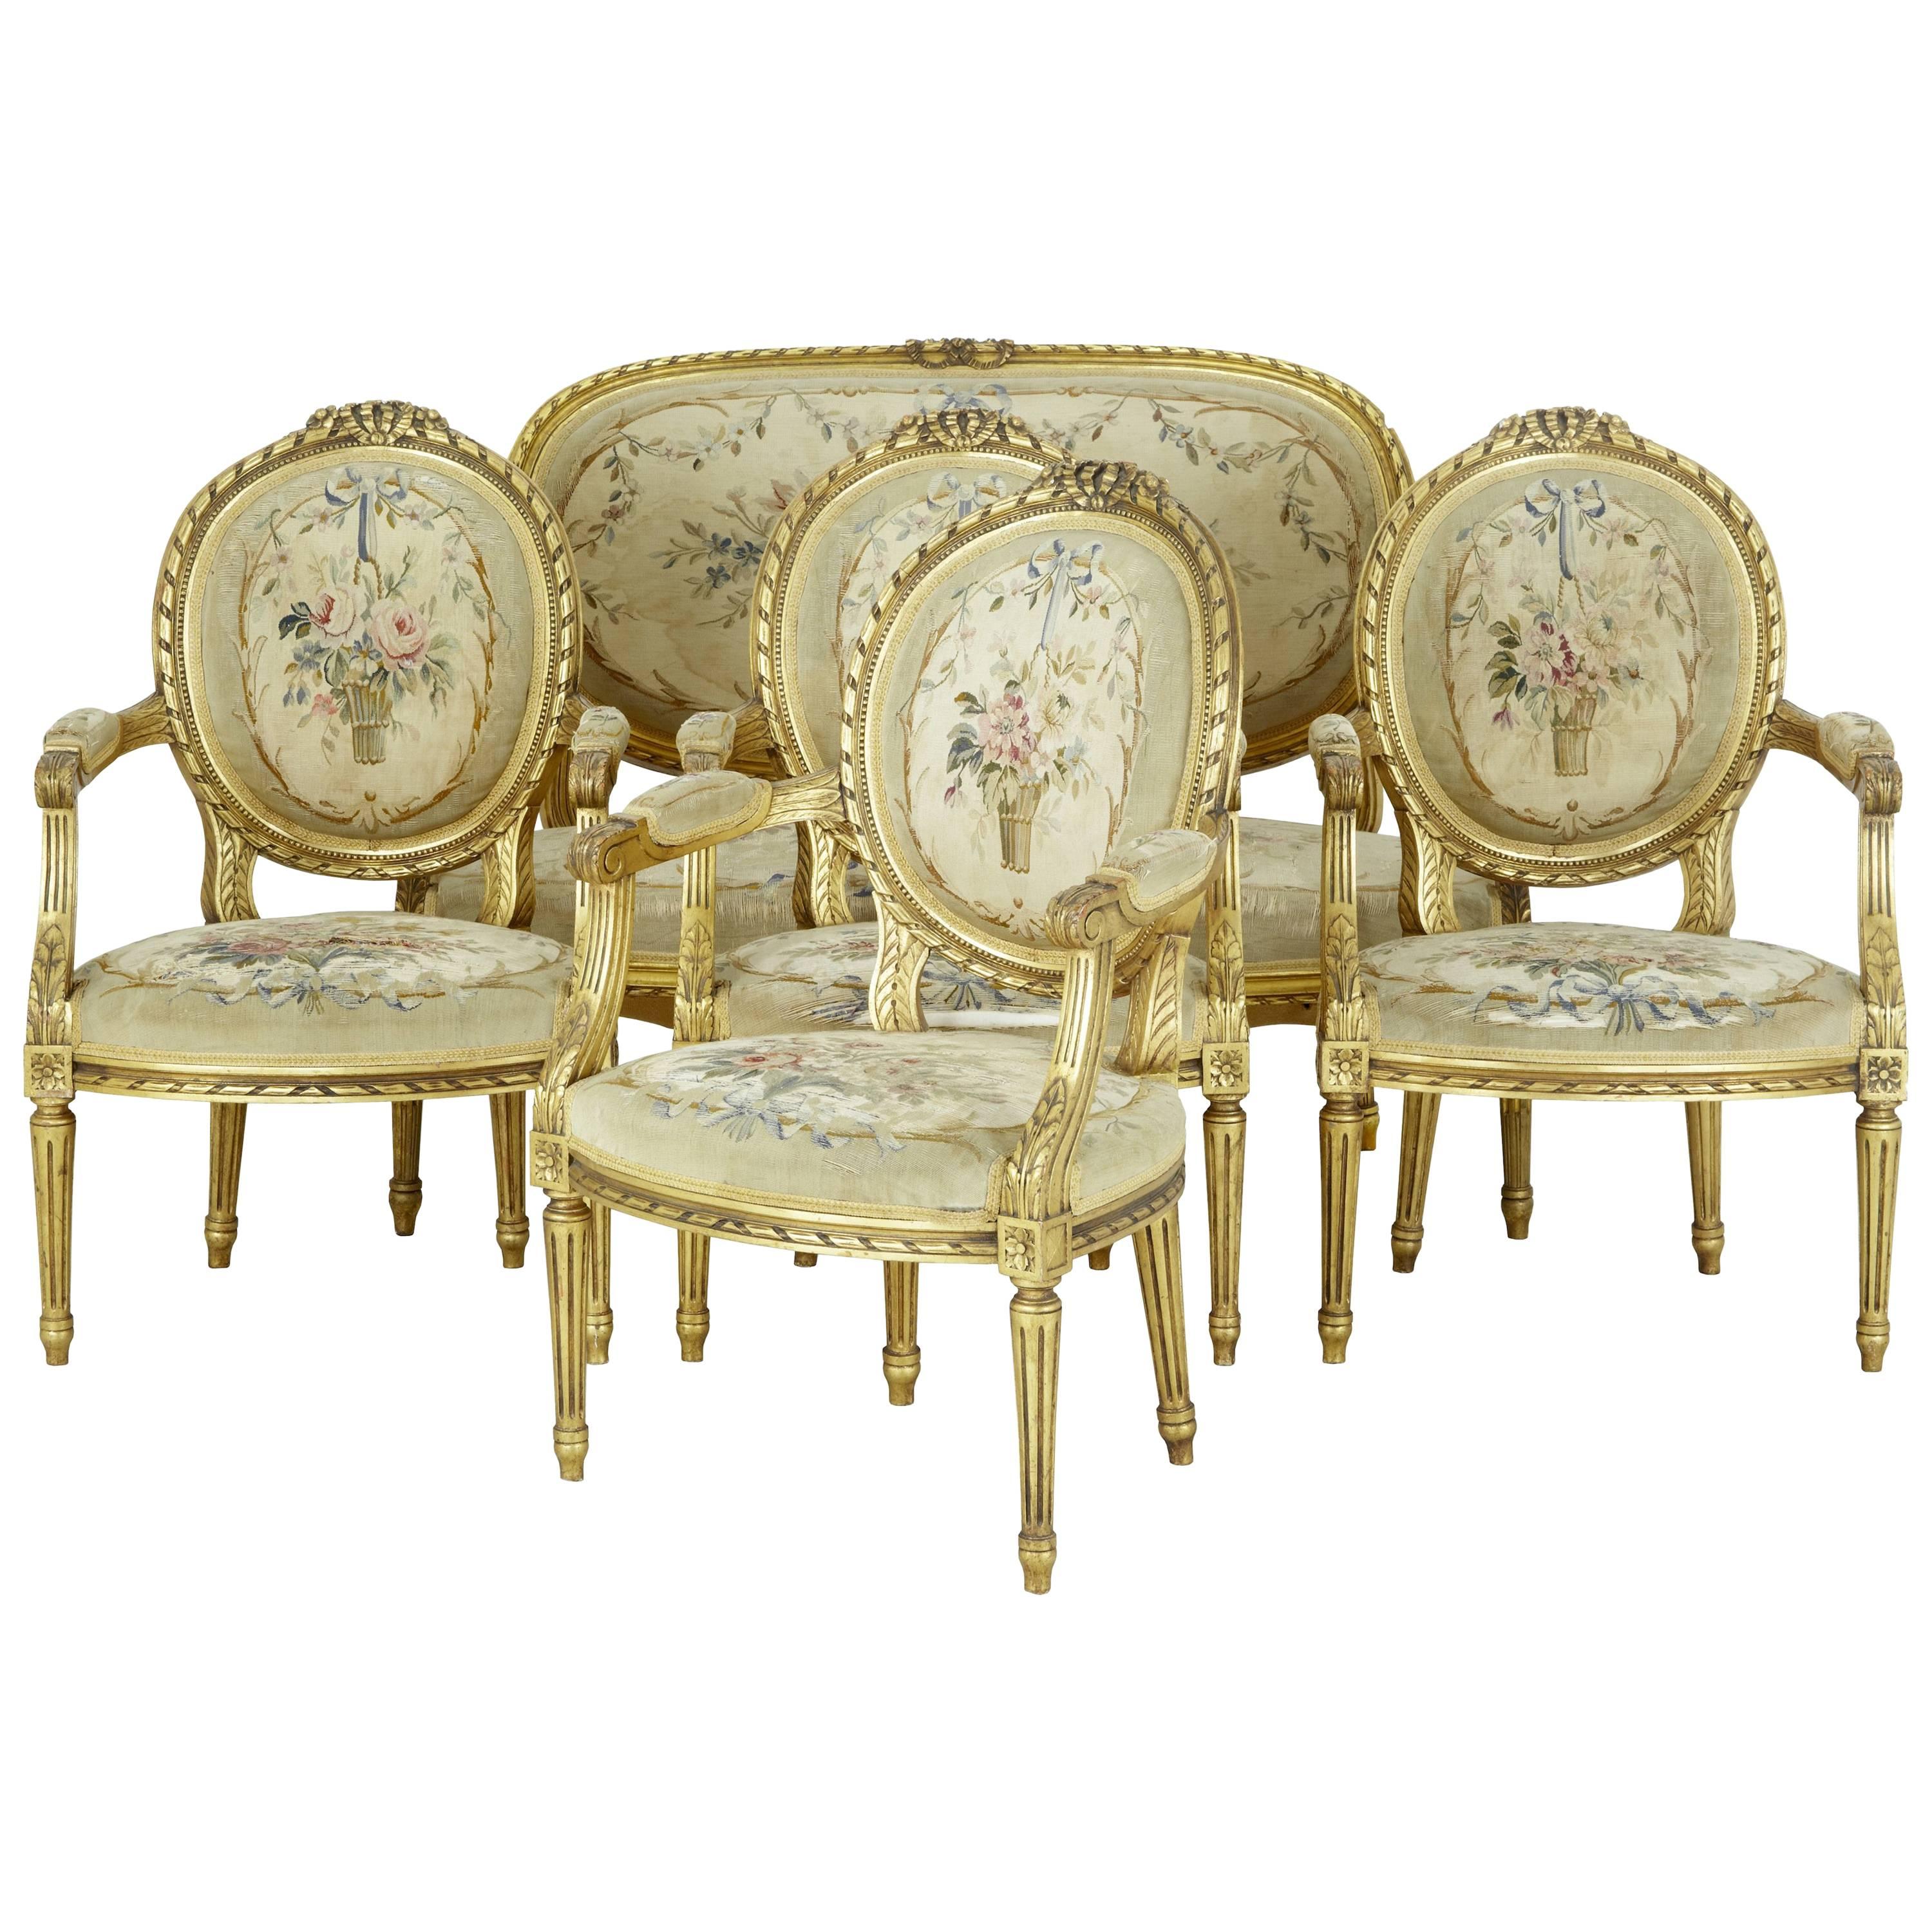 19th Century Five-Piece Carved Wood and Gilt Salon Suite